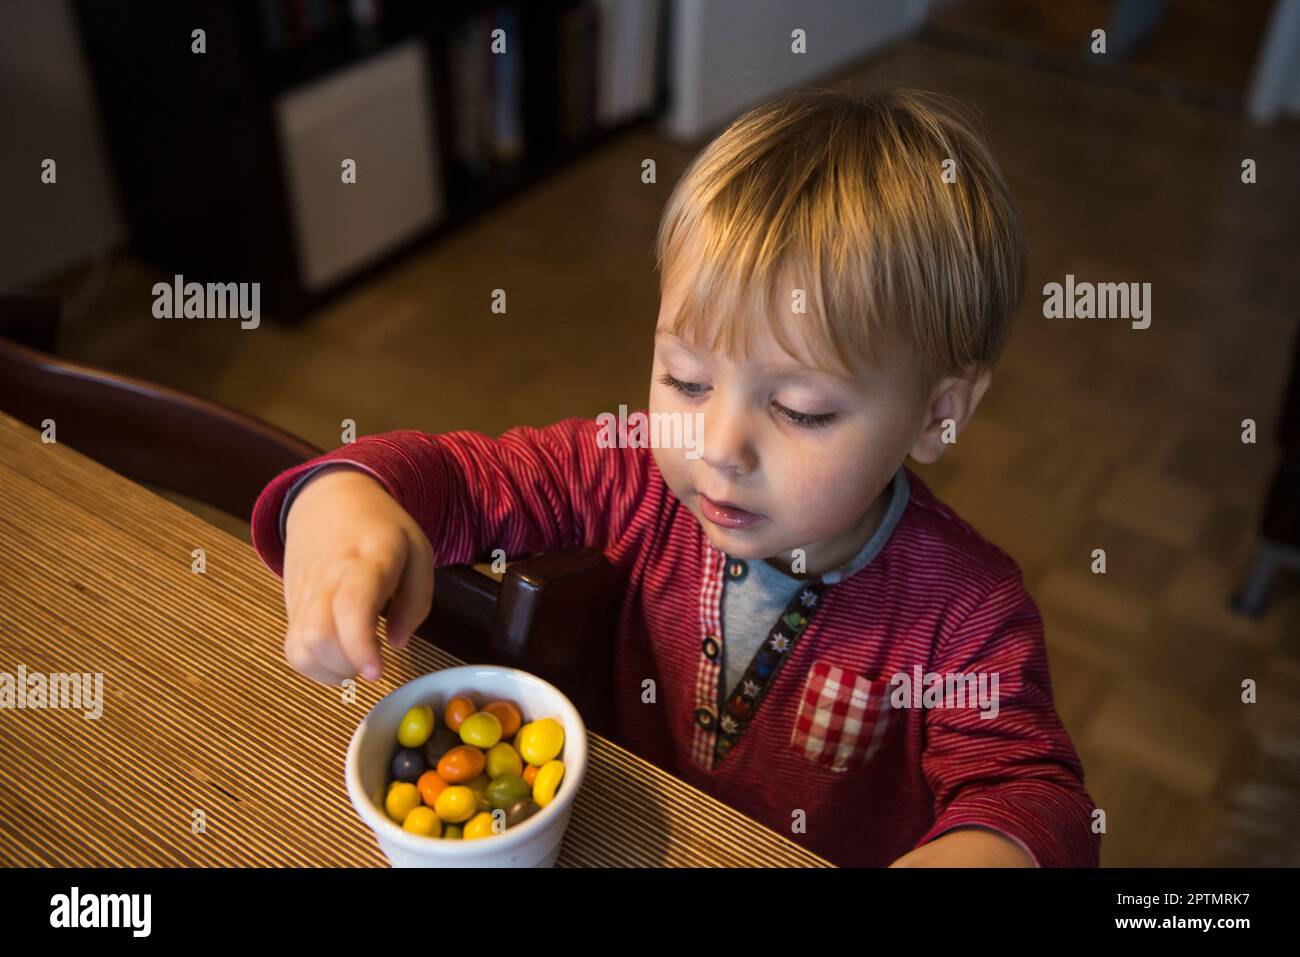 Little boy with a jar of candies, Munich, Germany Stock Photo